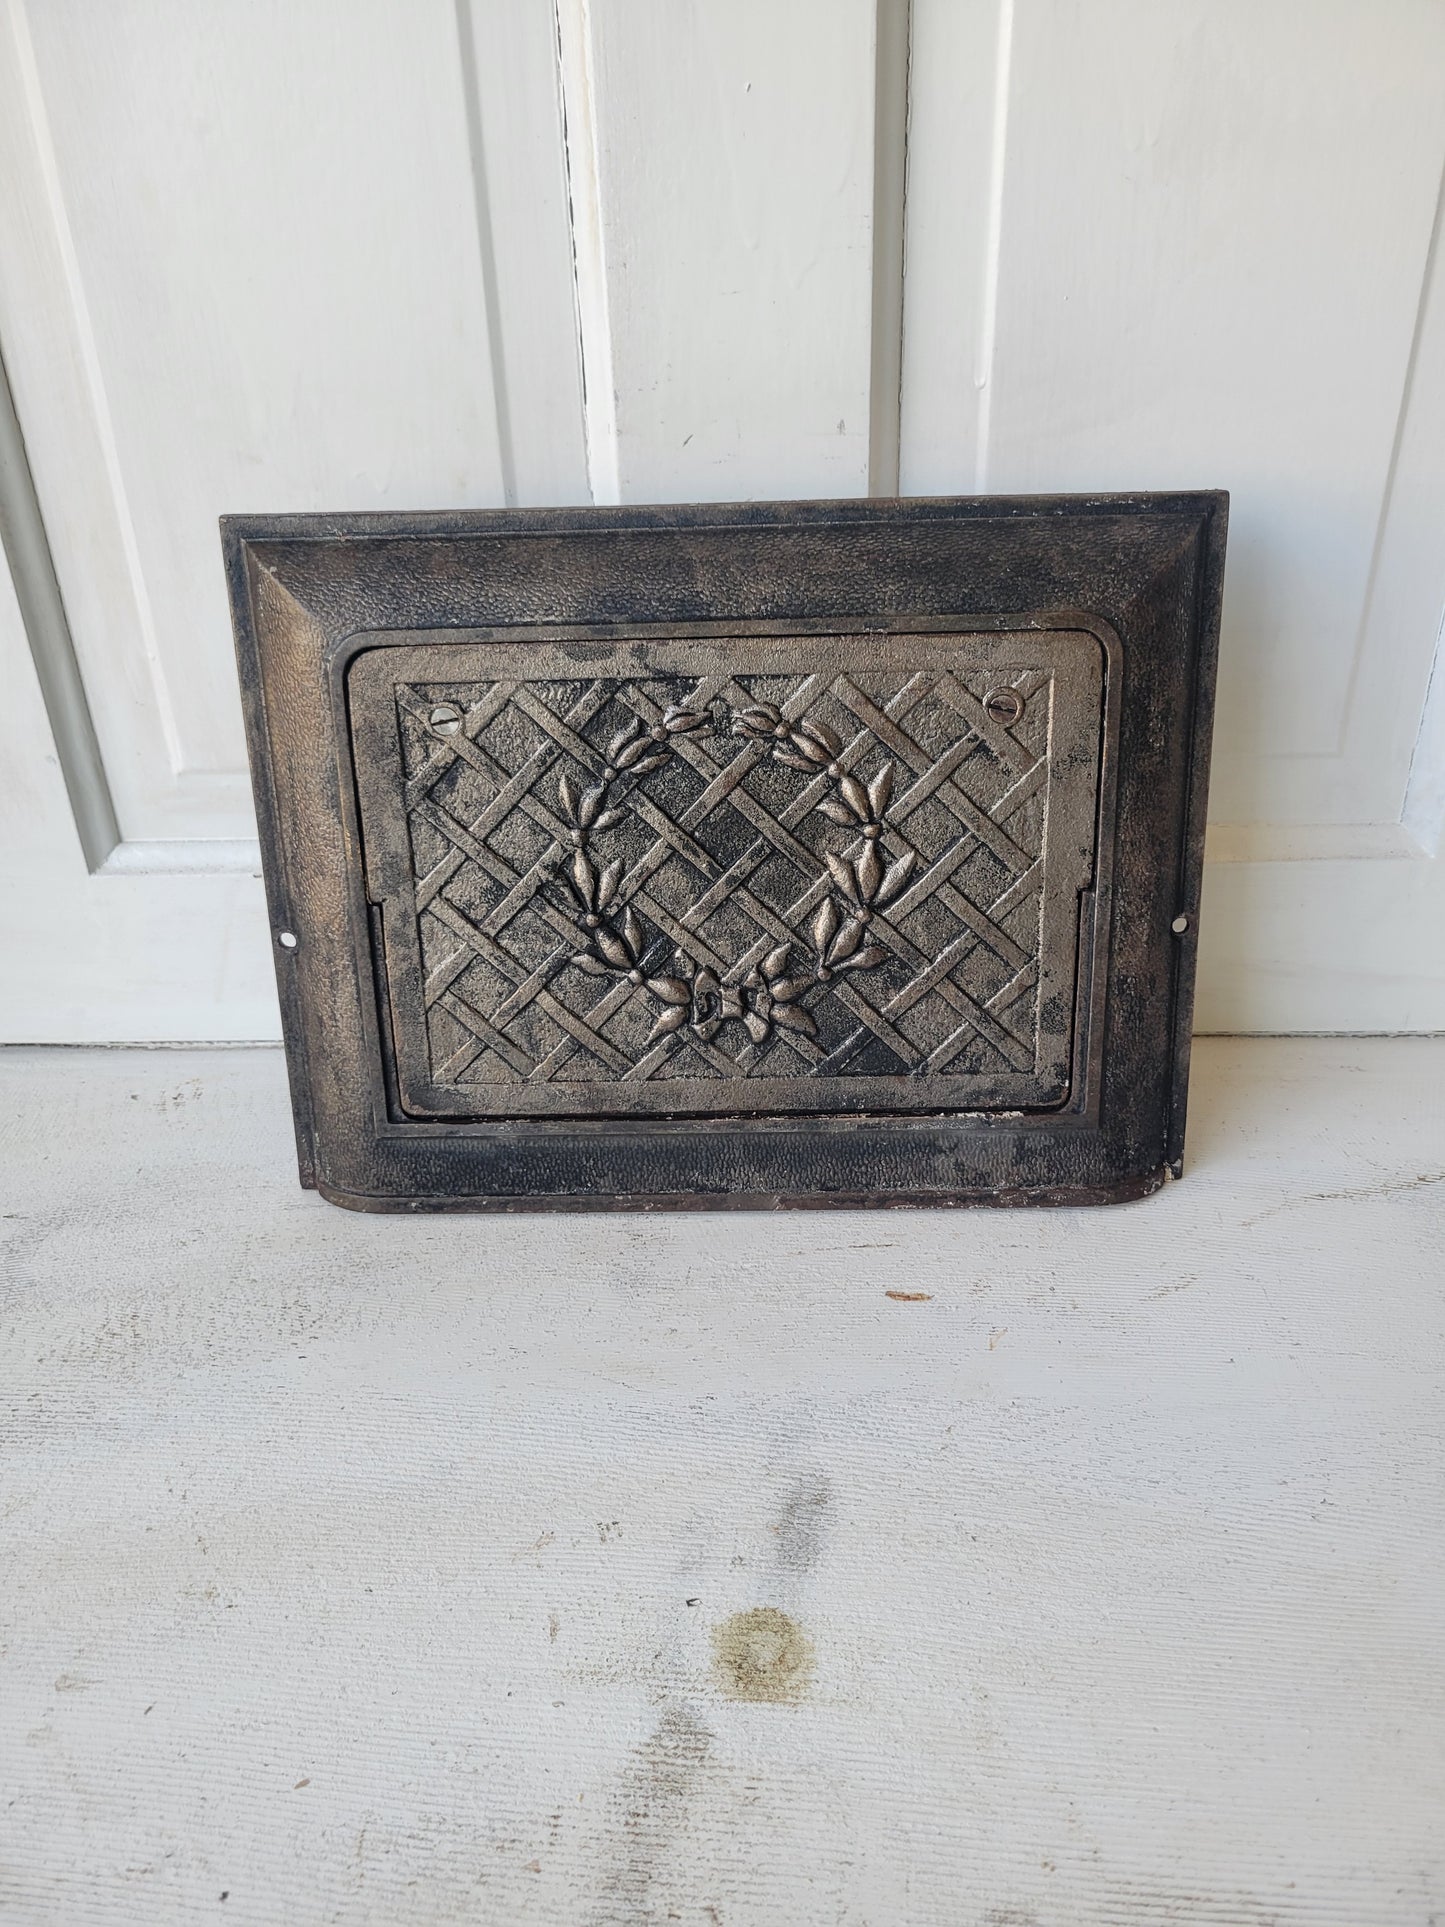 10 x 14 Fancy Cast Iron Fold Out Vent Cover, Antique Floor Register Cover with Dampers #072901